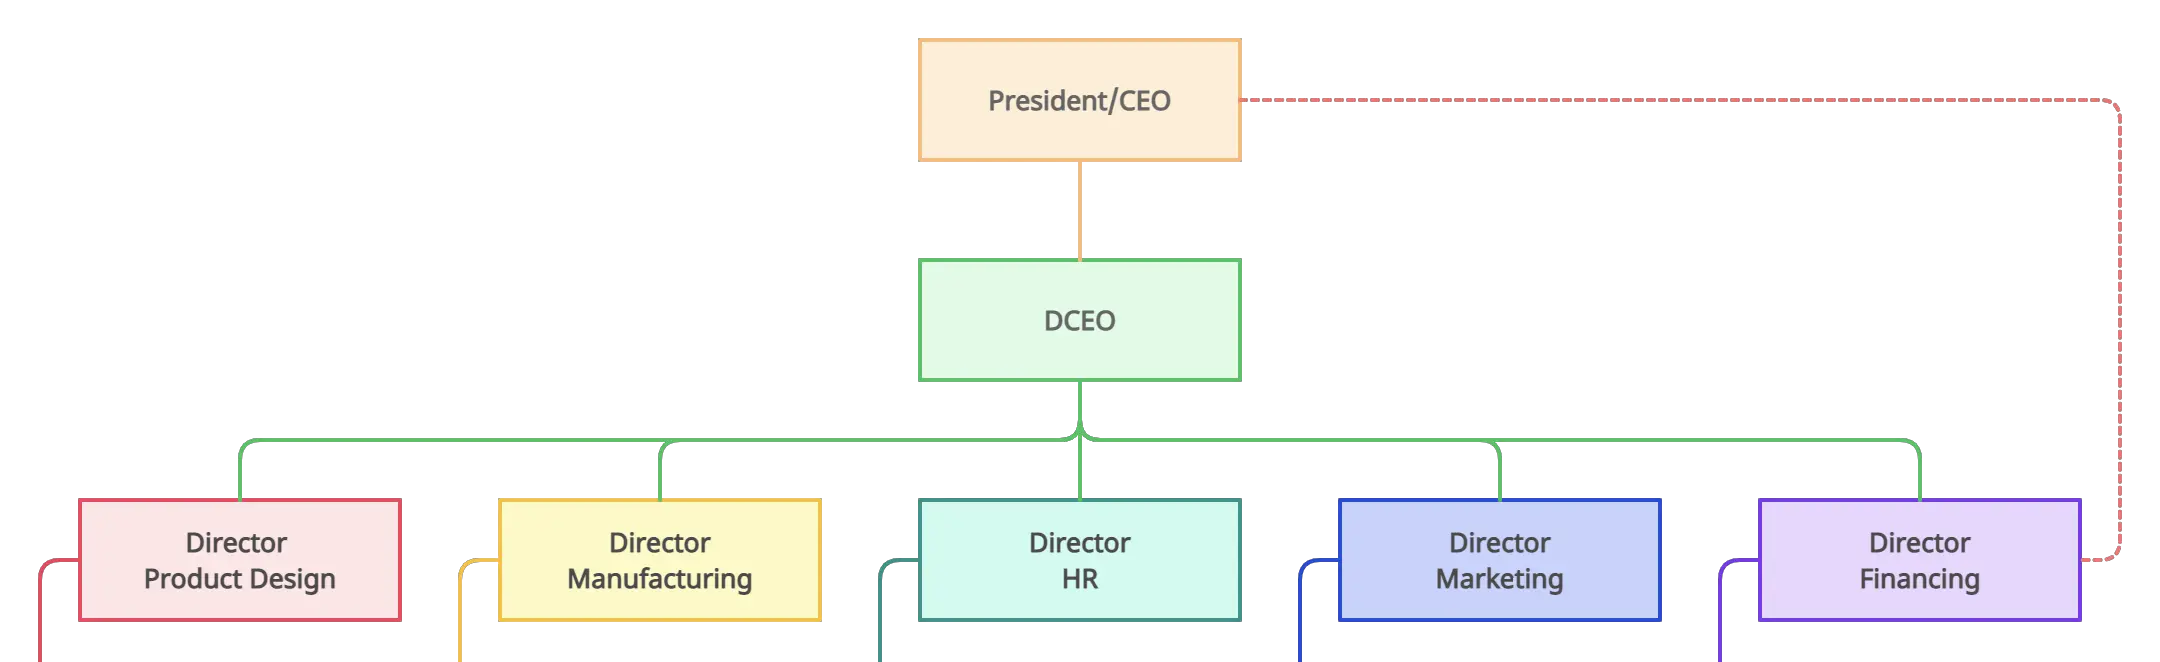 Establishing hierarchical structure of decision-making and power - Org Chart